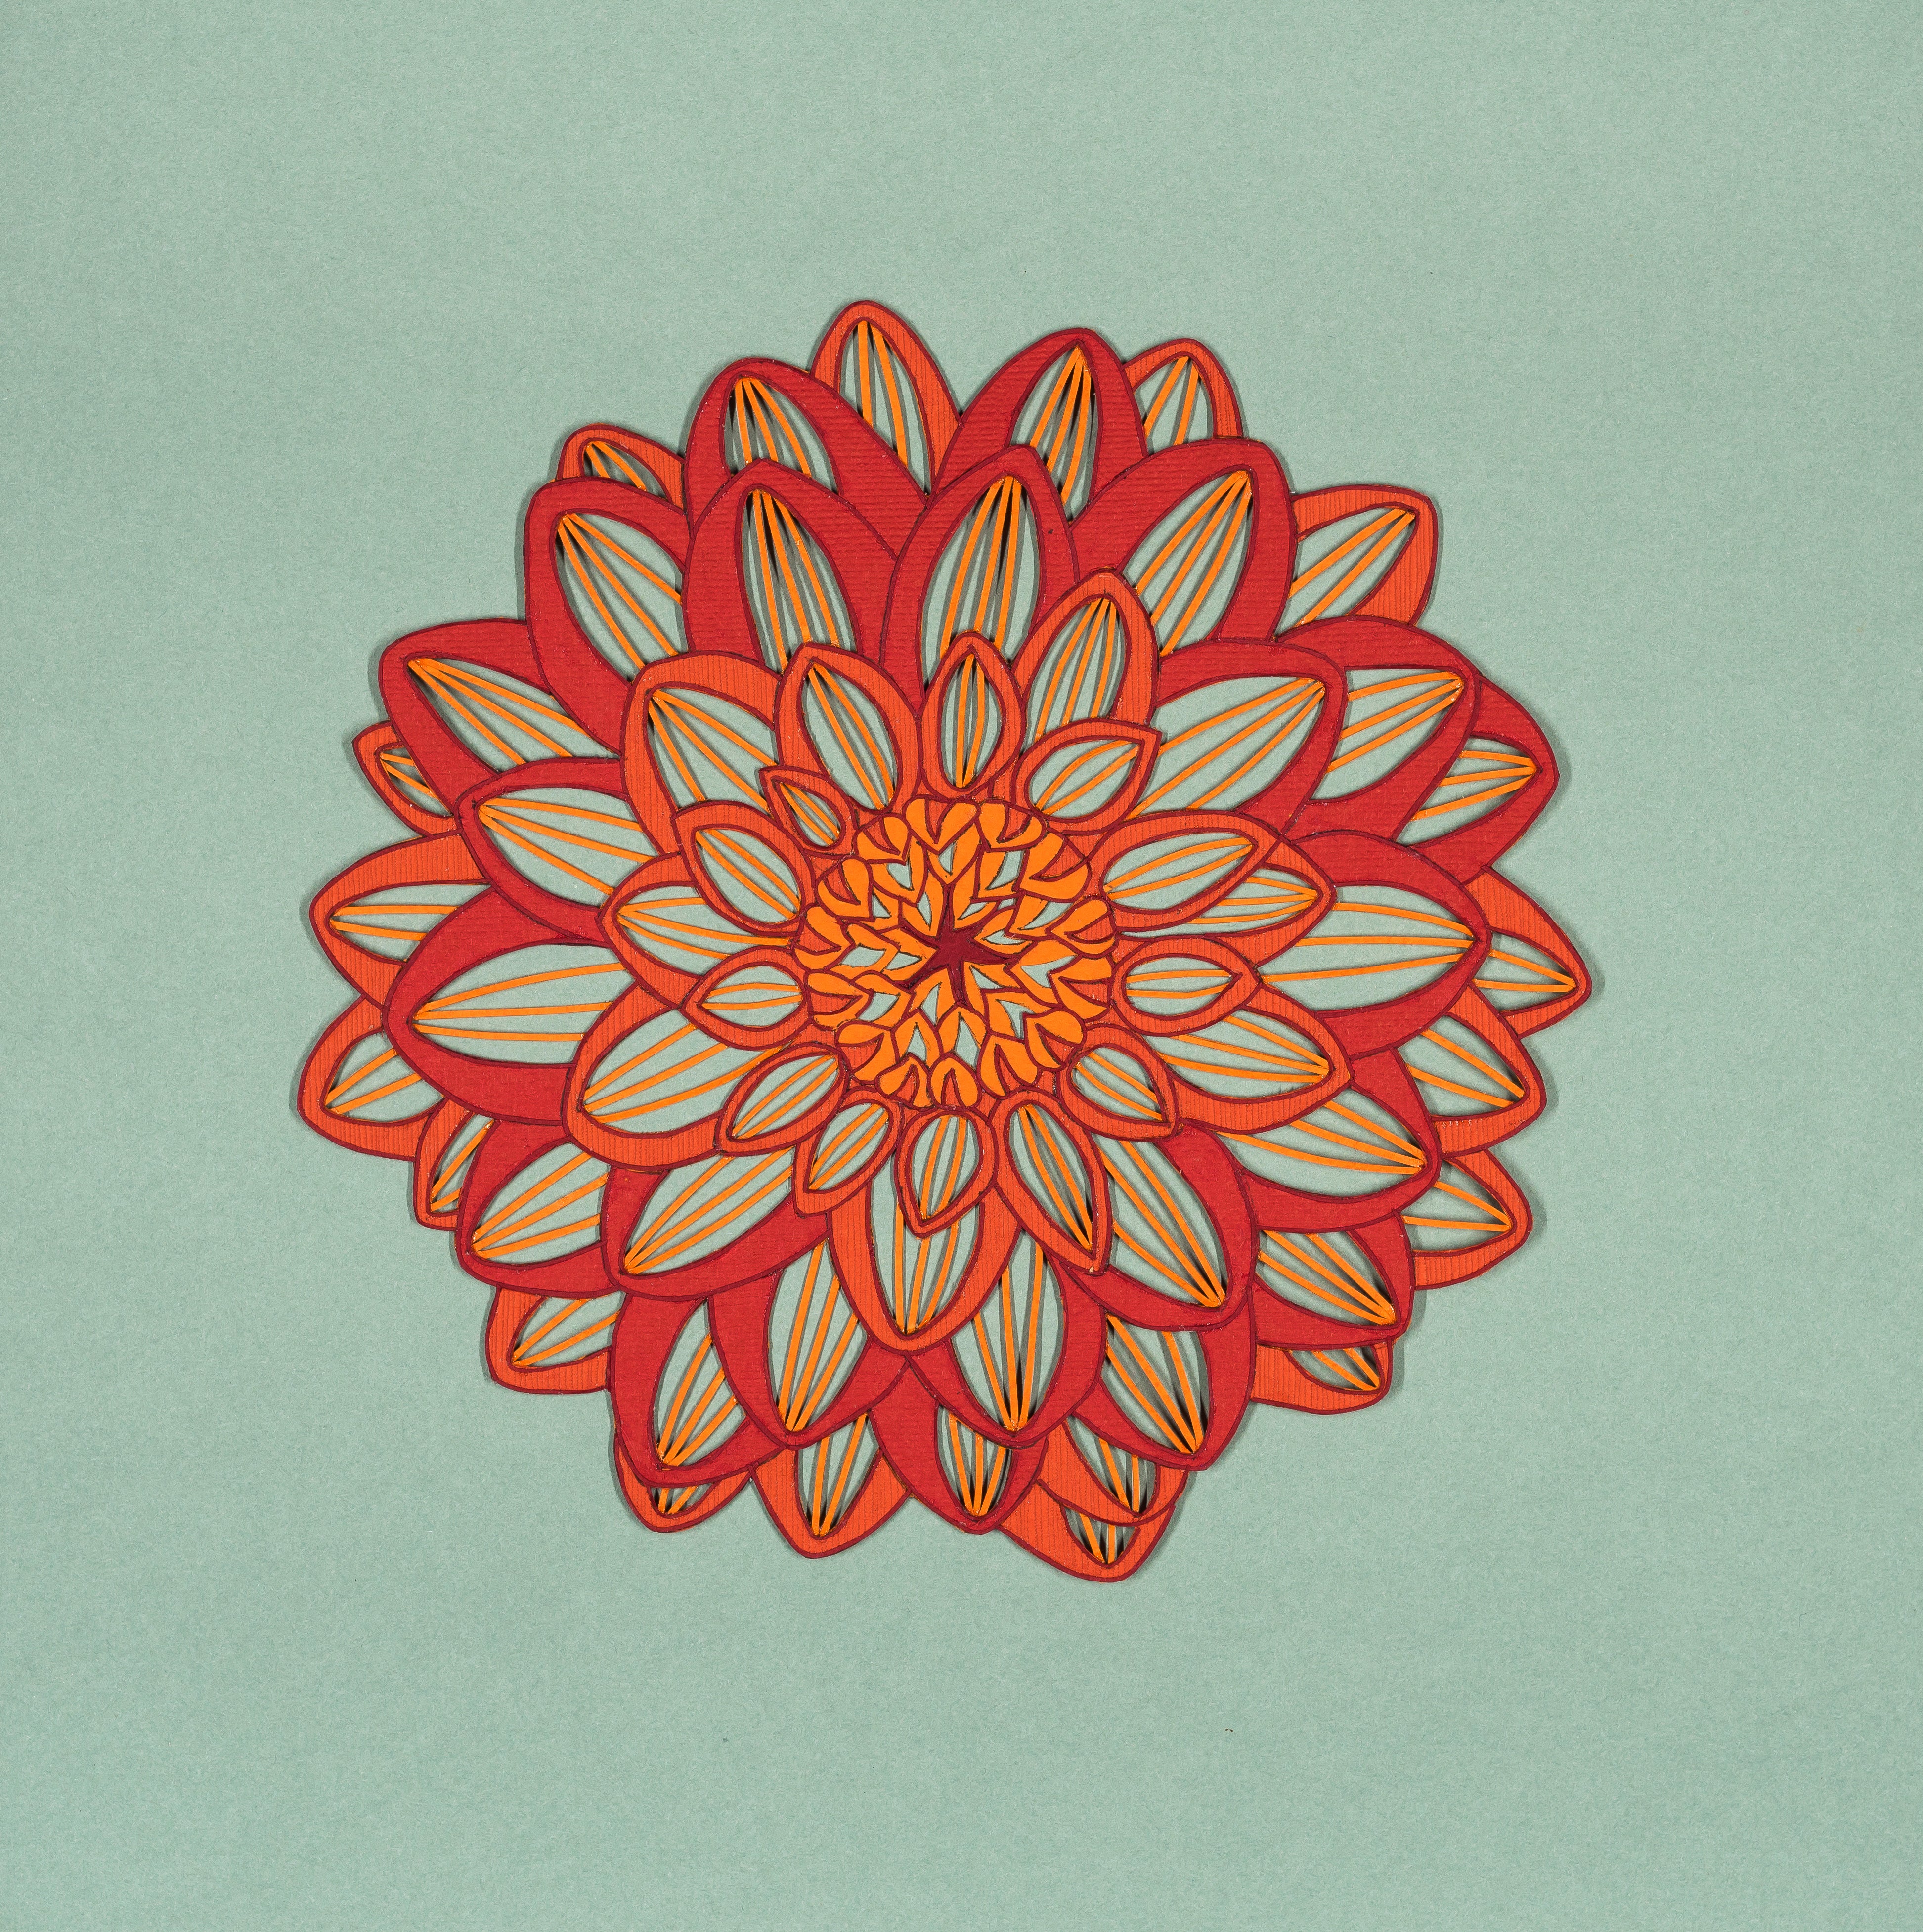 Dahlia Hortensis ‘Red Sky’ hand cut paper art by Yola and Daria